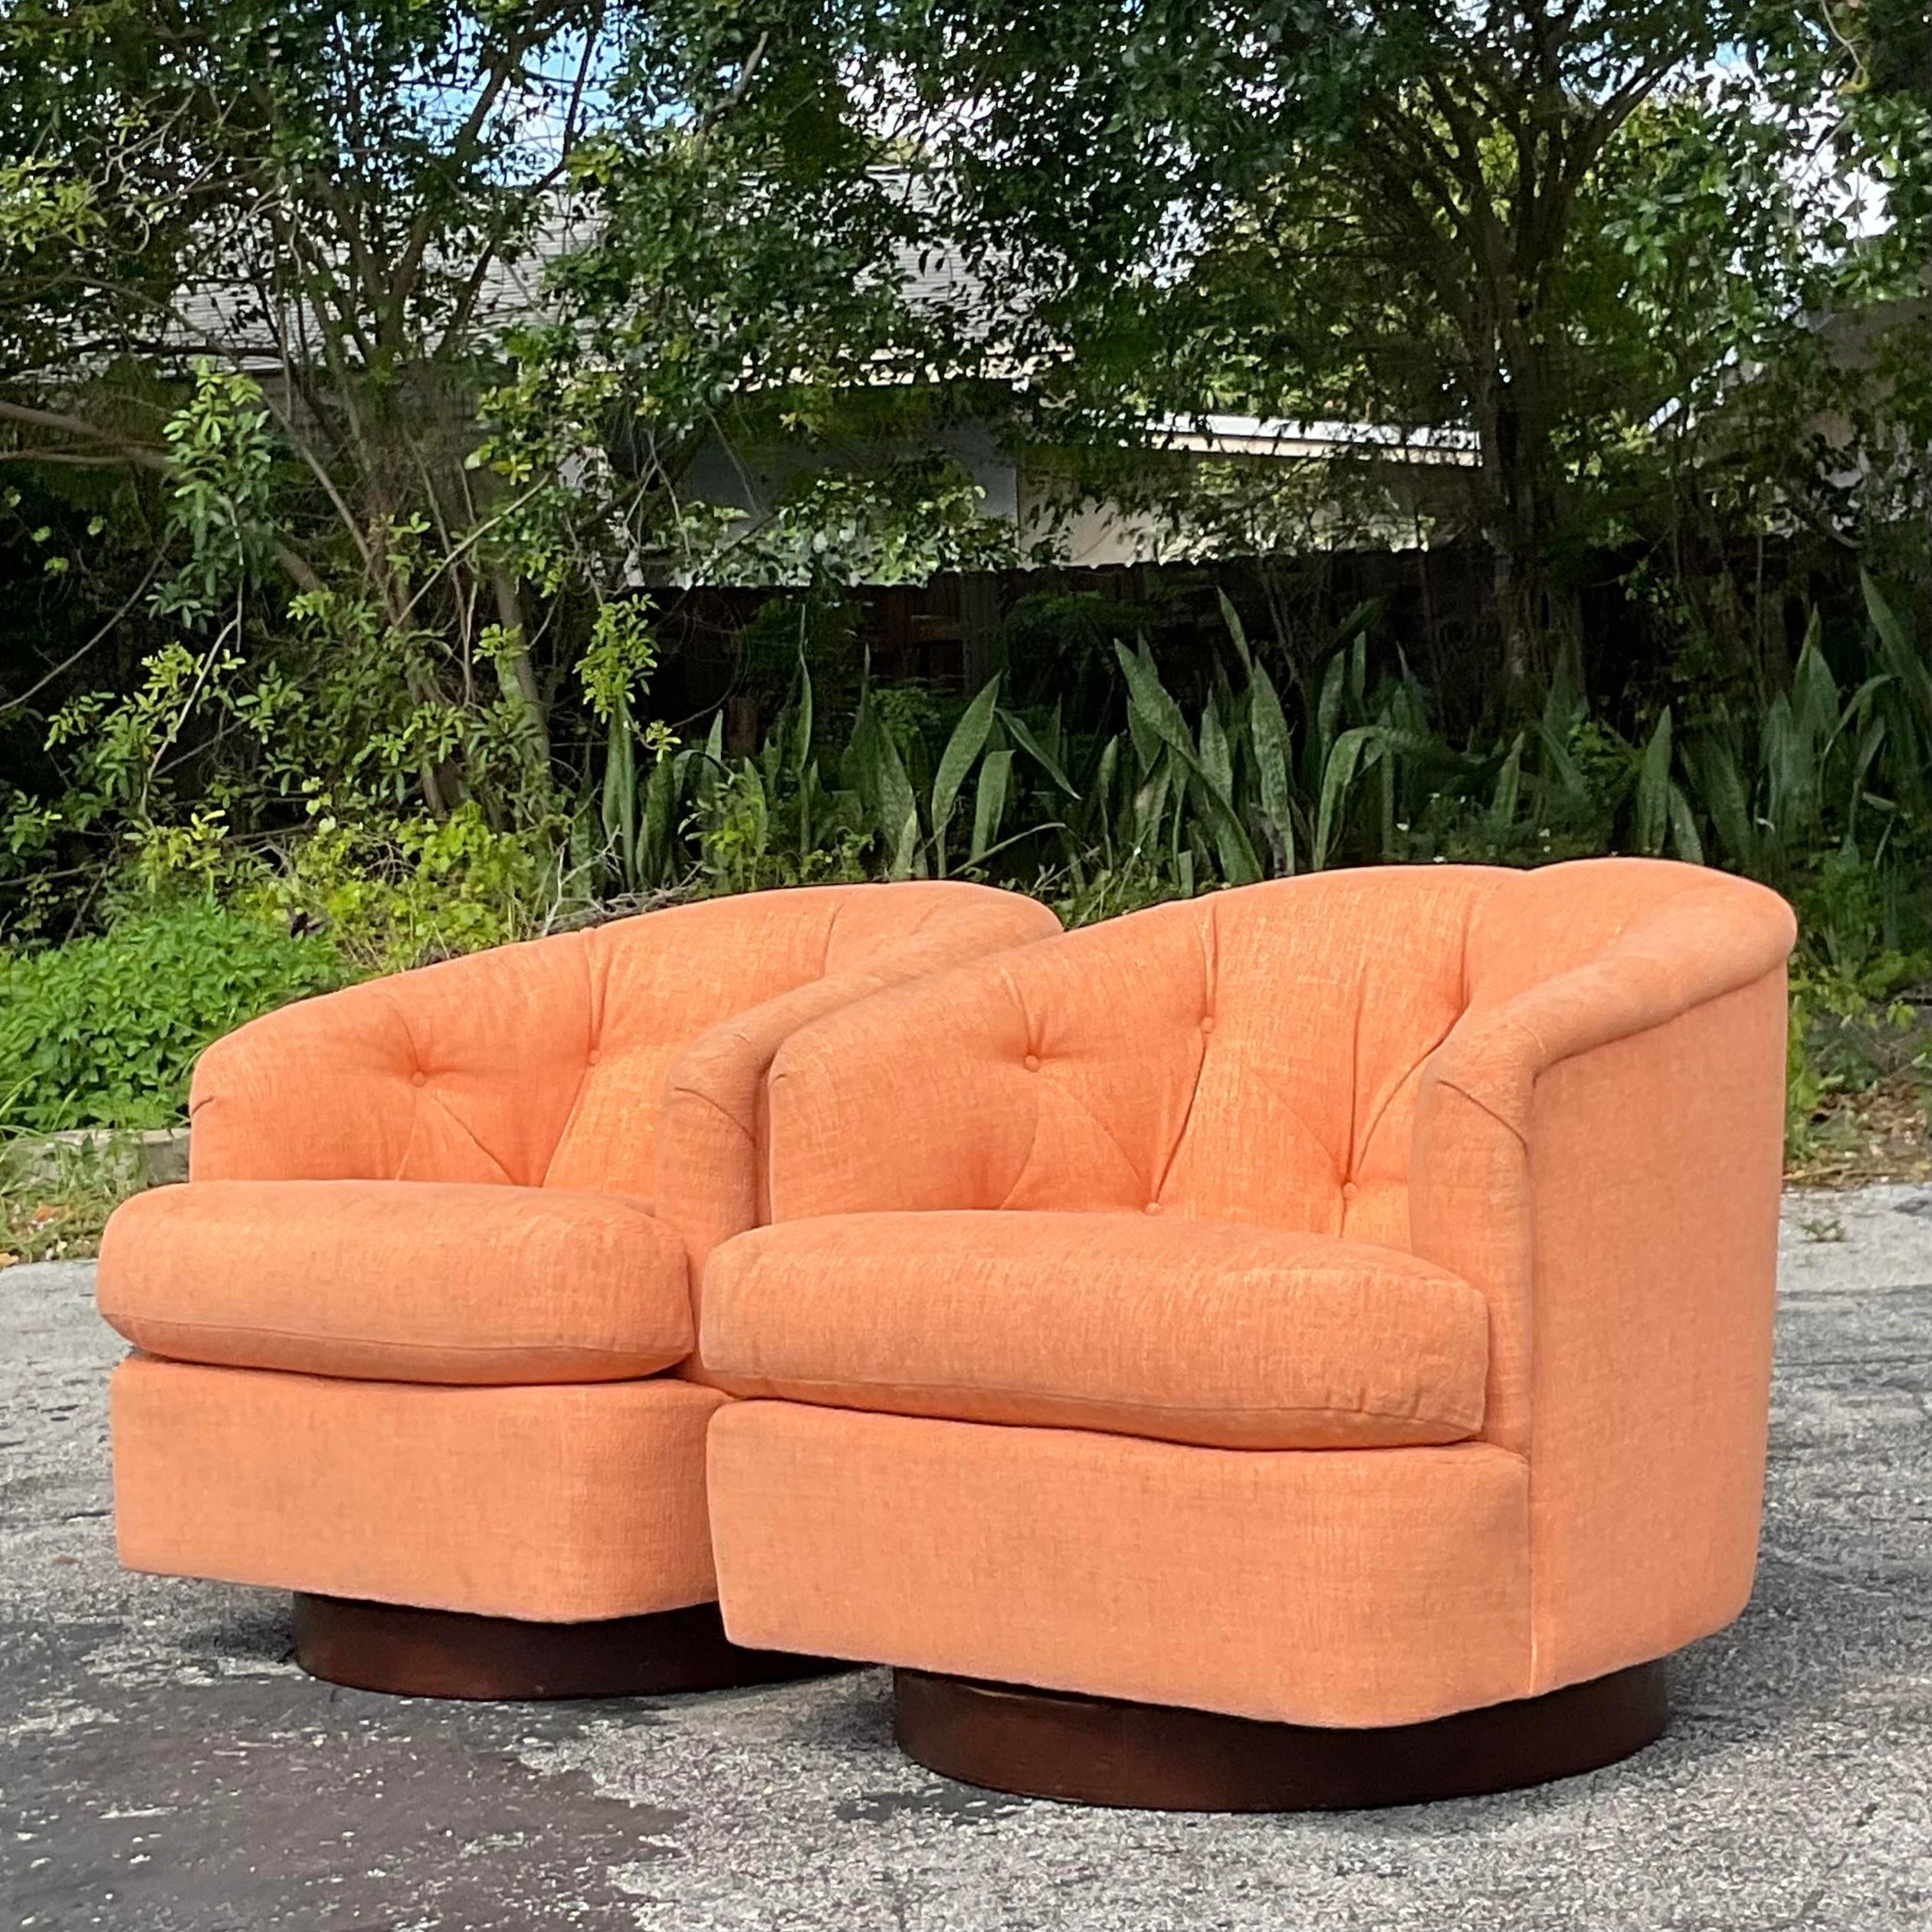 Vintage Boho Tufted Swivel Chairs After Milo Baughman - a Pair For Sale 1